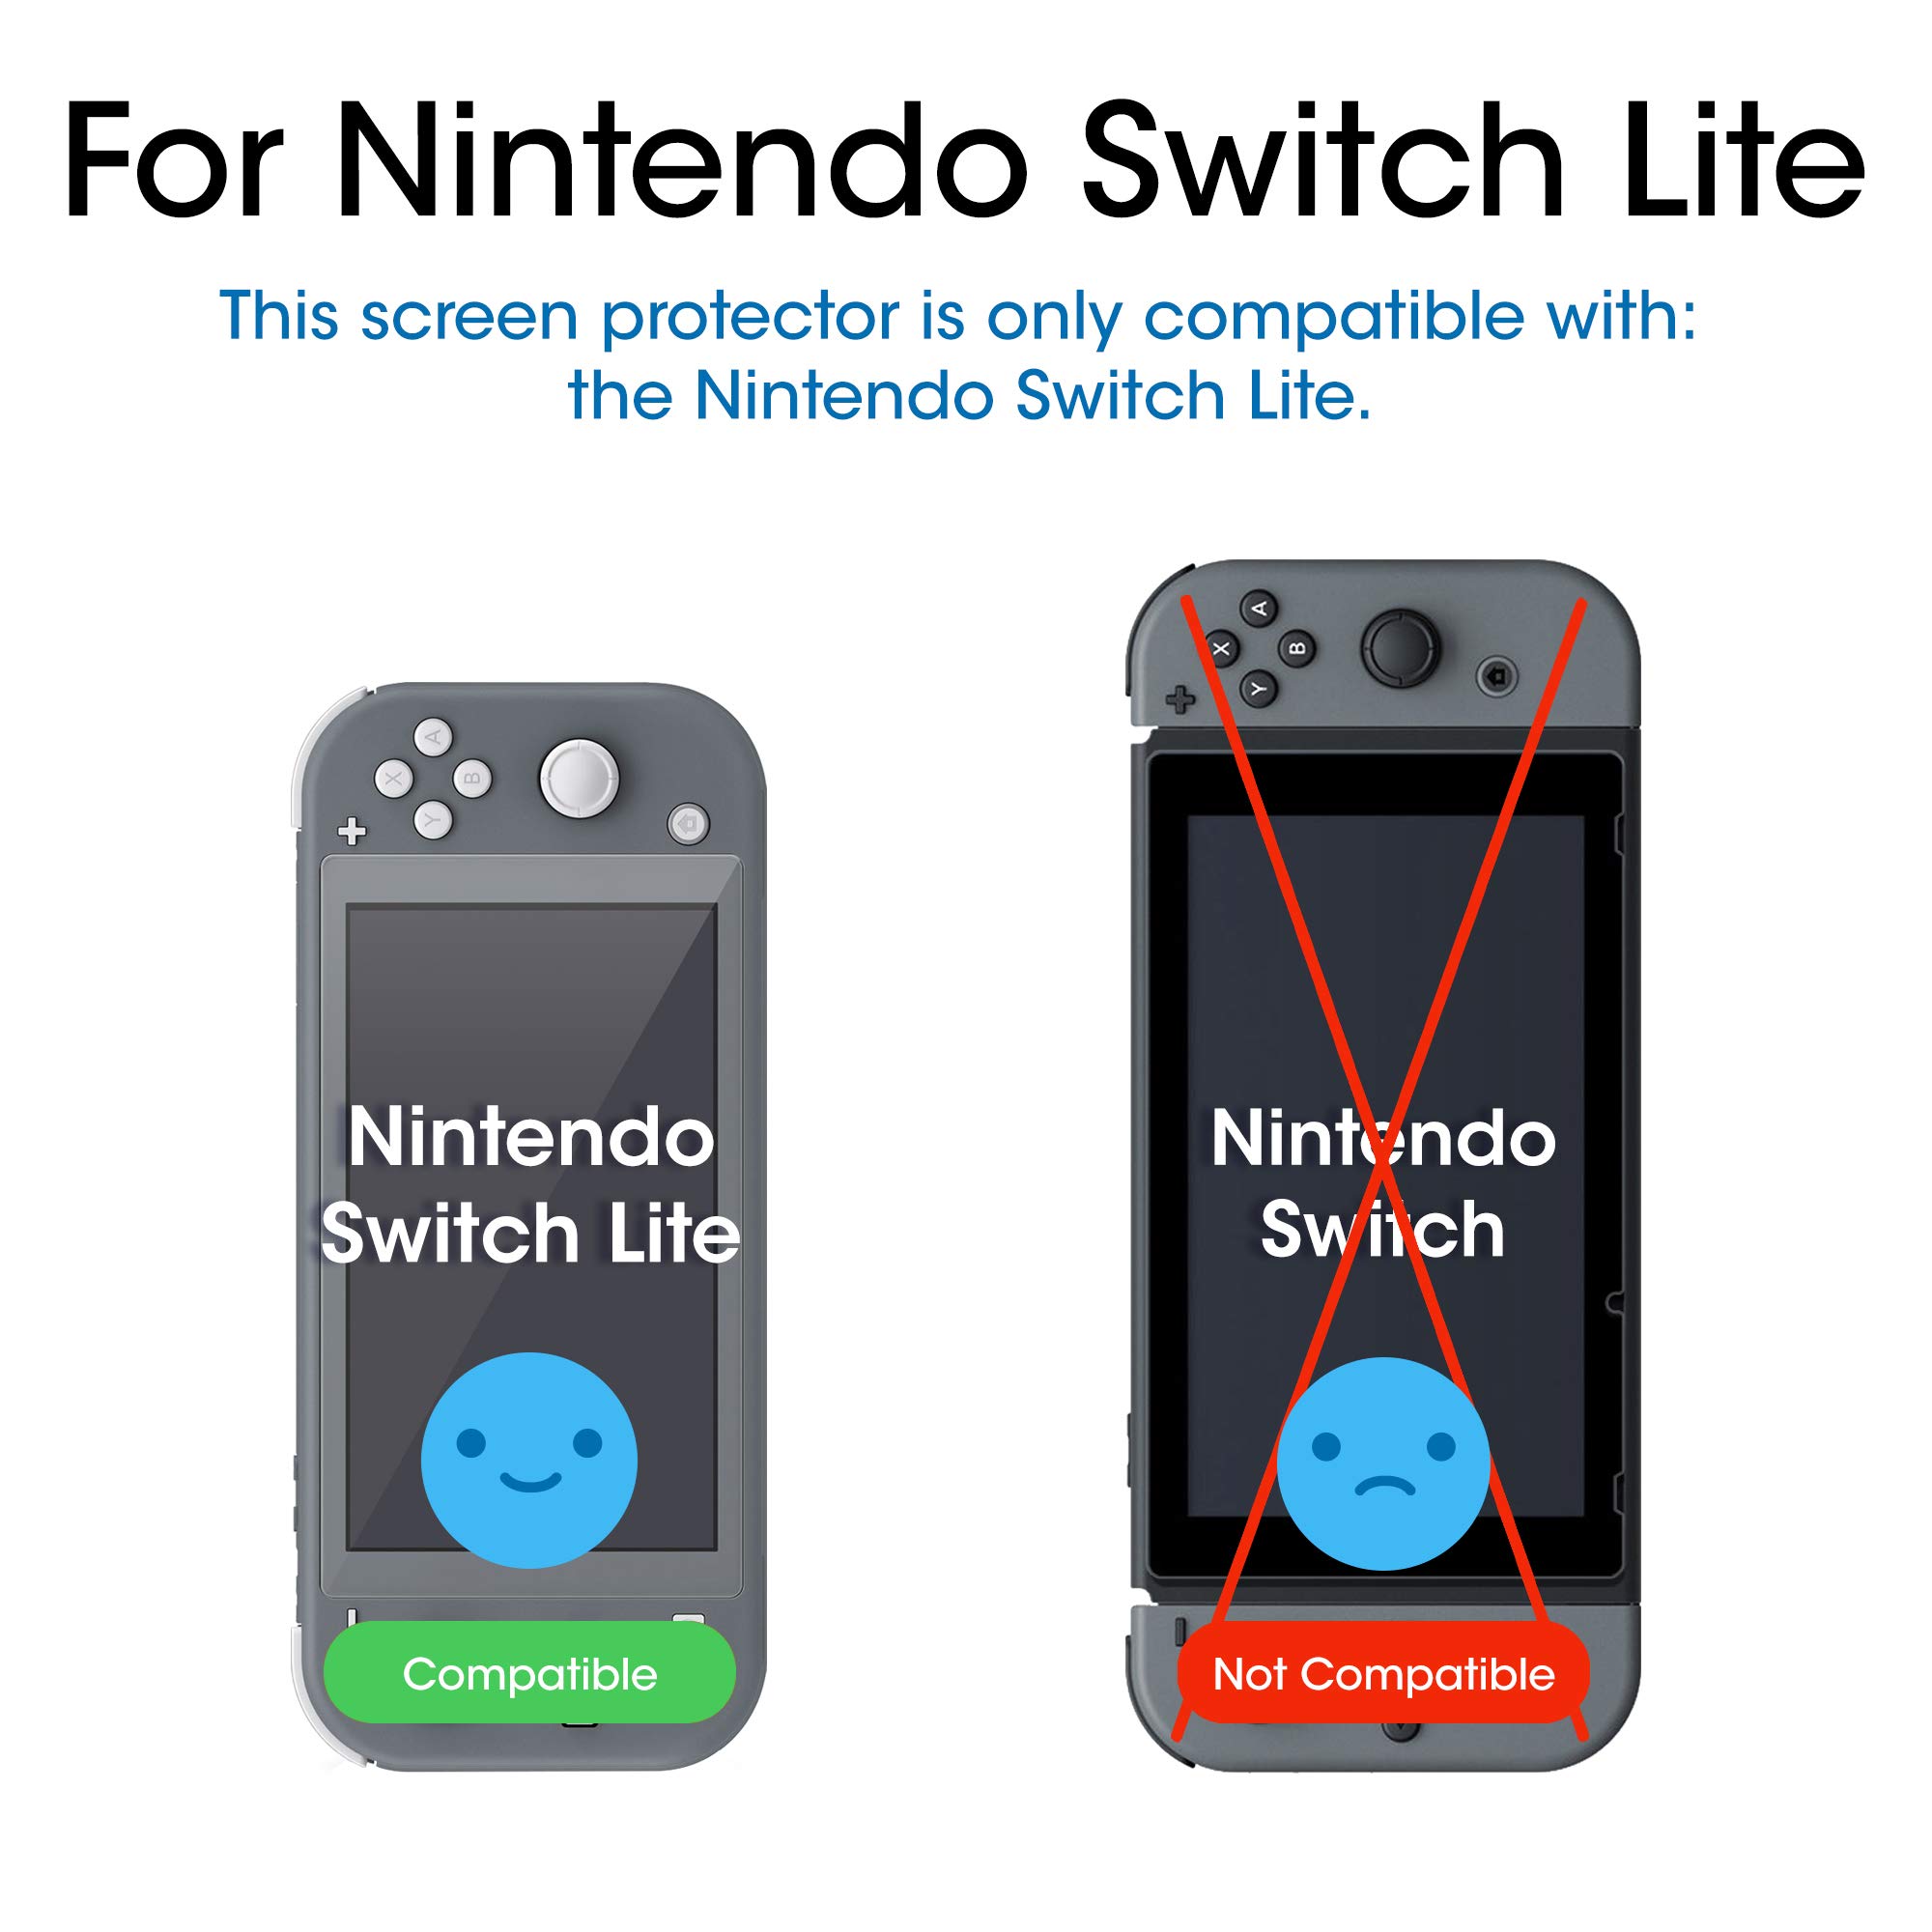 amFilm Tempered Screen Protector for Nintendo Switch Lite 2019, Glass, 3 Pack